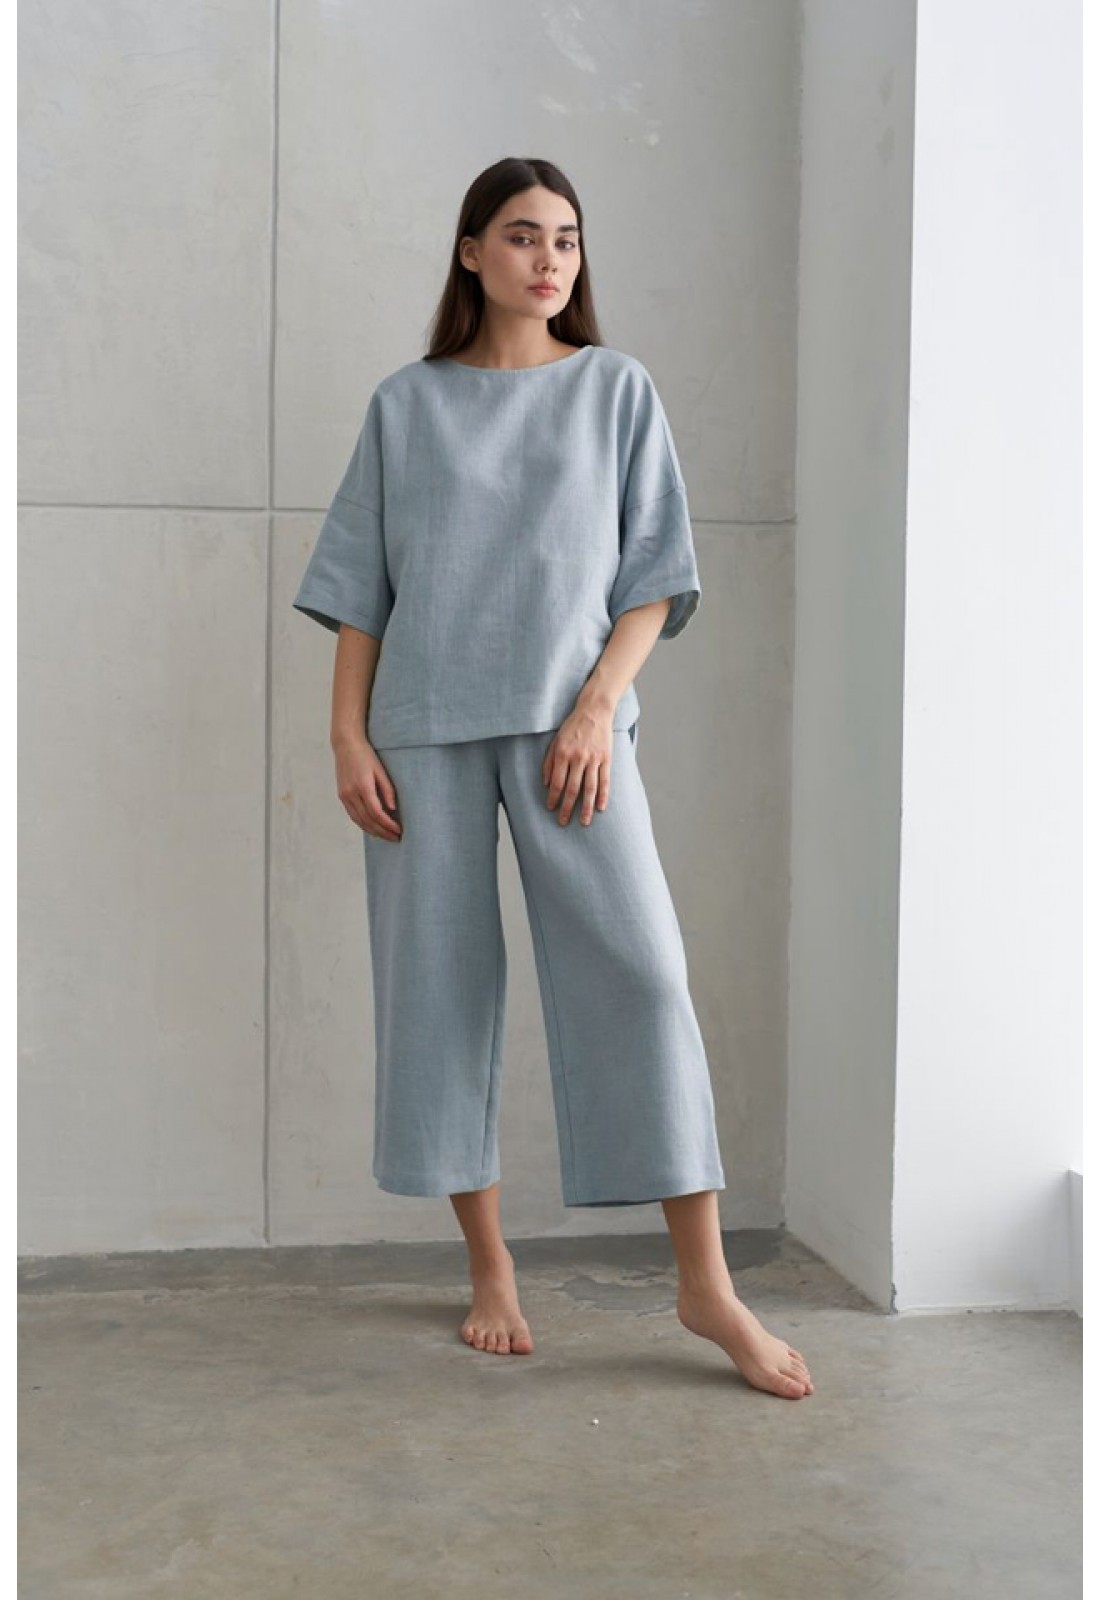 zanvin Cotton Linen Sets for Women 2 Piece Outfits Summer Loose 3/4 Sleeve  Oversized Top and Wide Leg Pants Sets Loungewear 